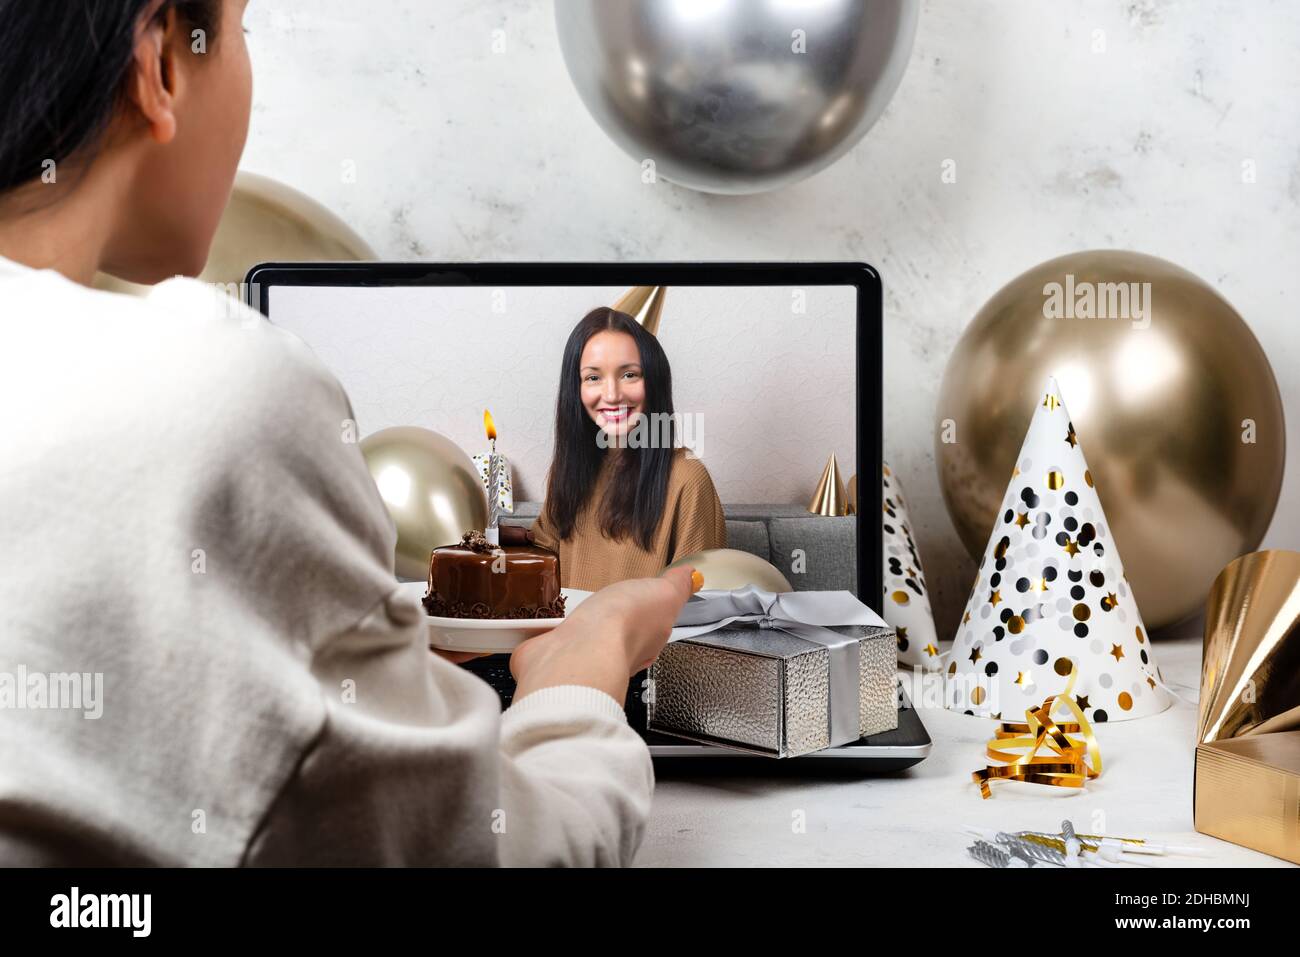 Young woman celebrating birthday online in quarantine time using video call with friend holding cupcake with candle. Remote Celebration Concept Stock Photo